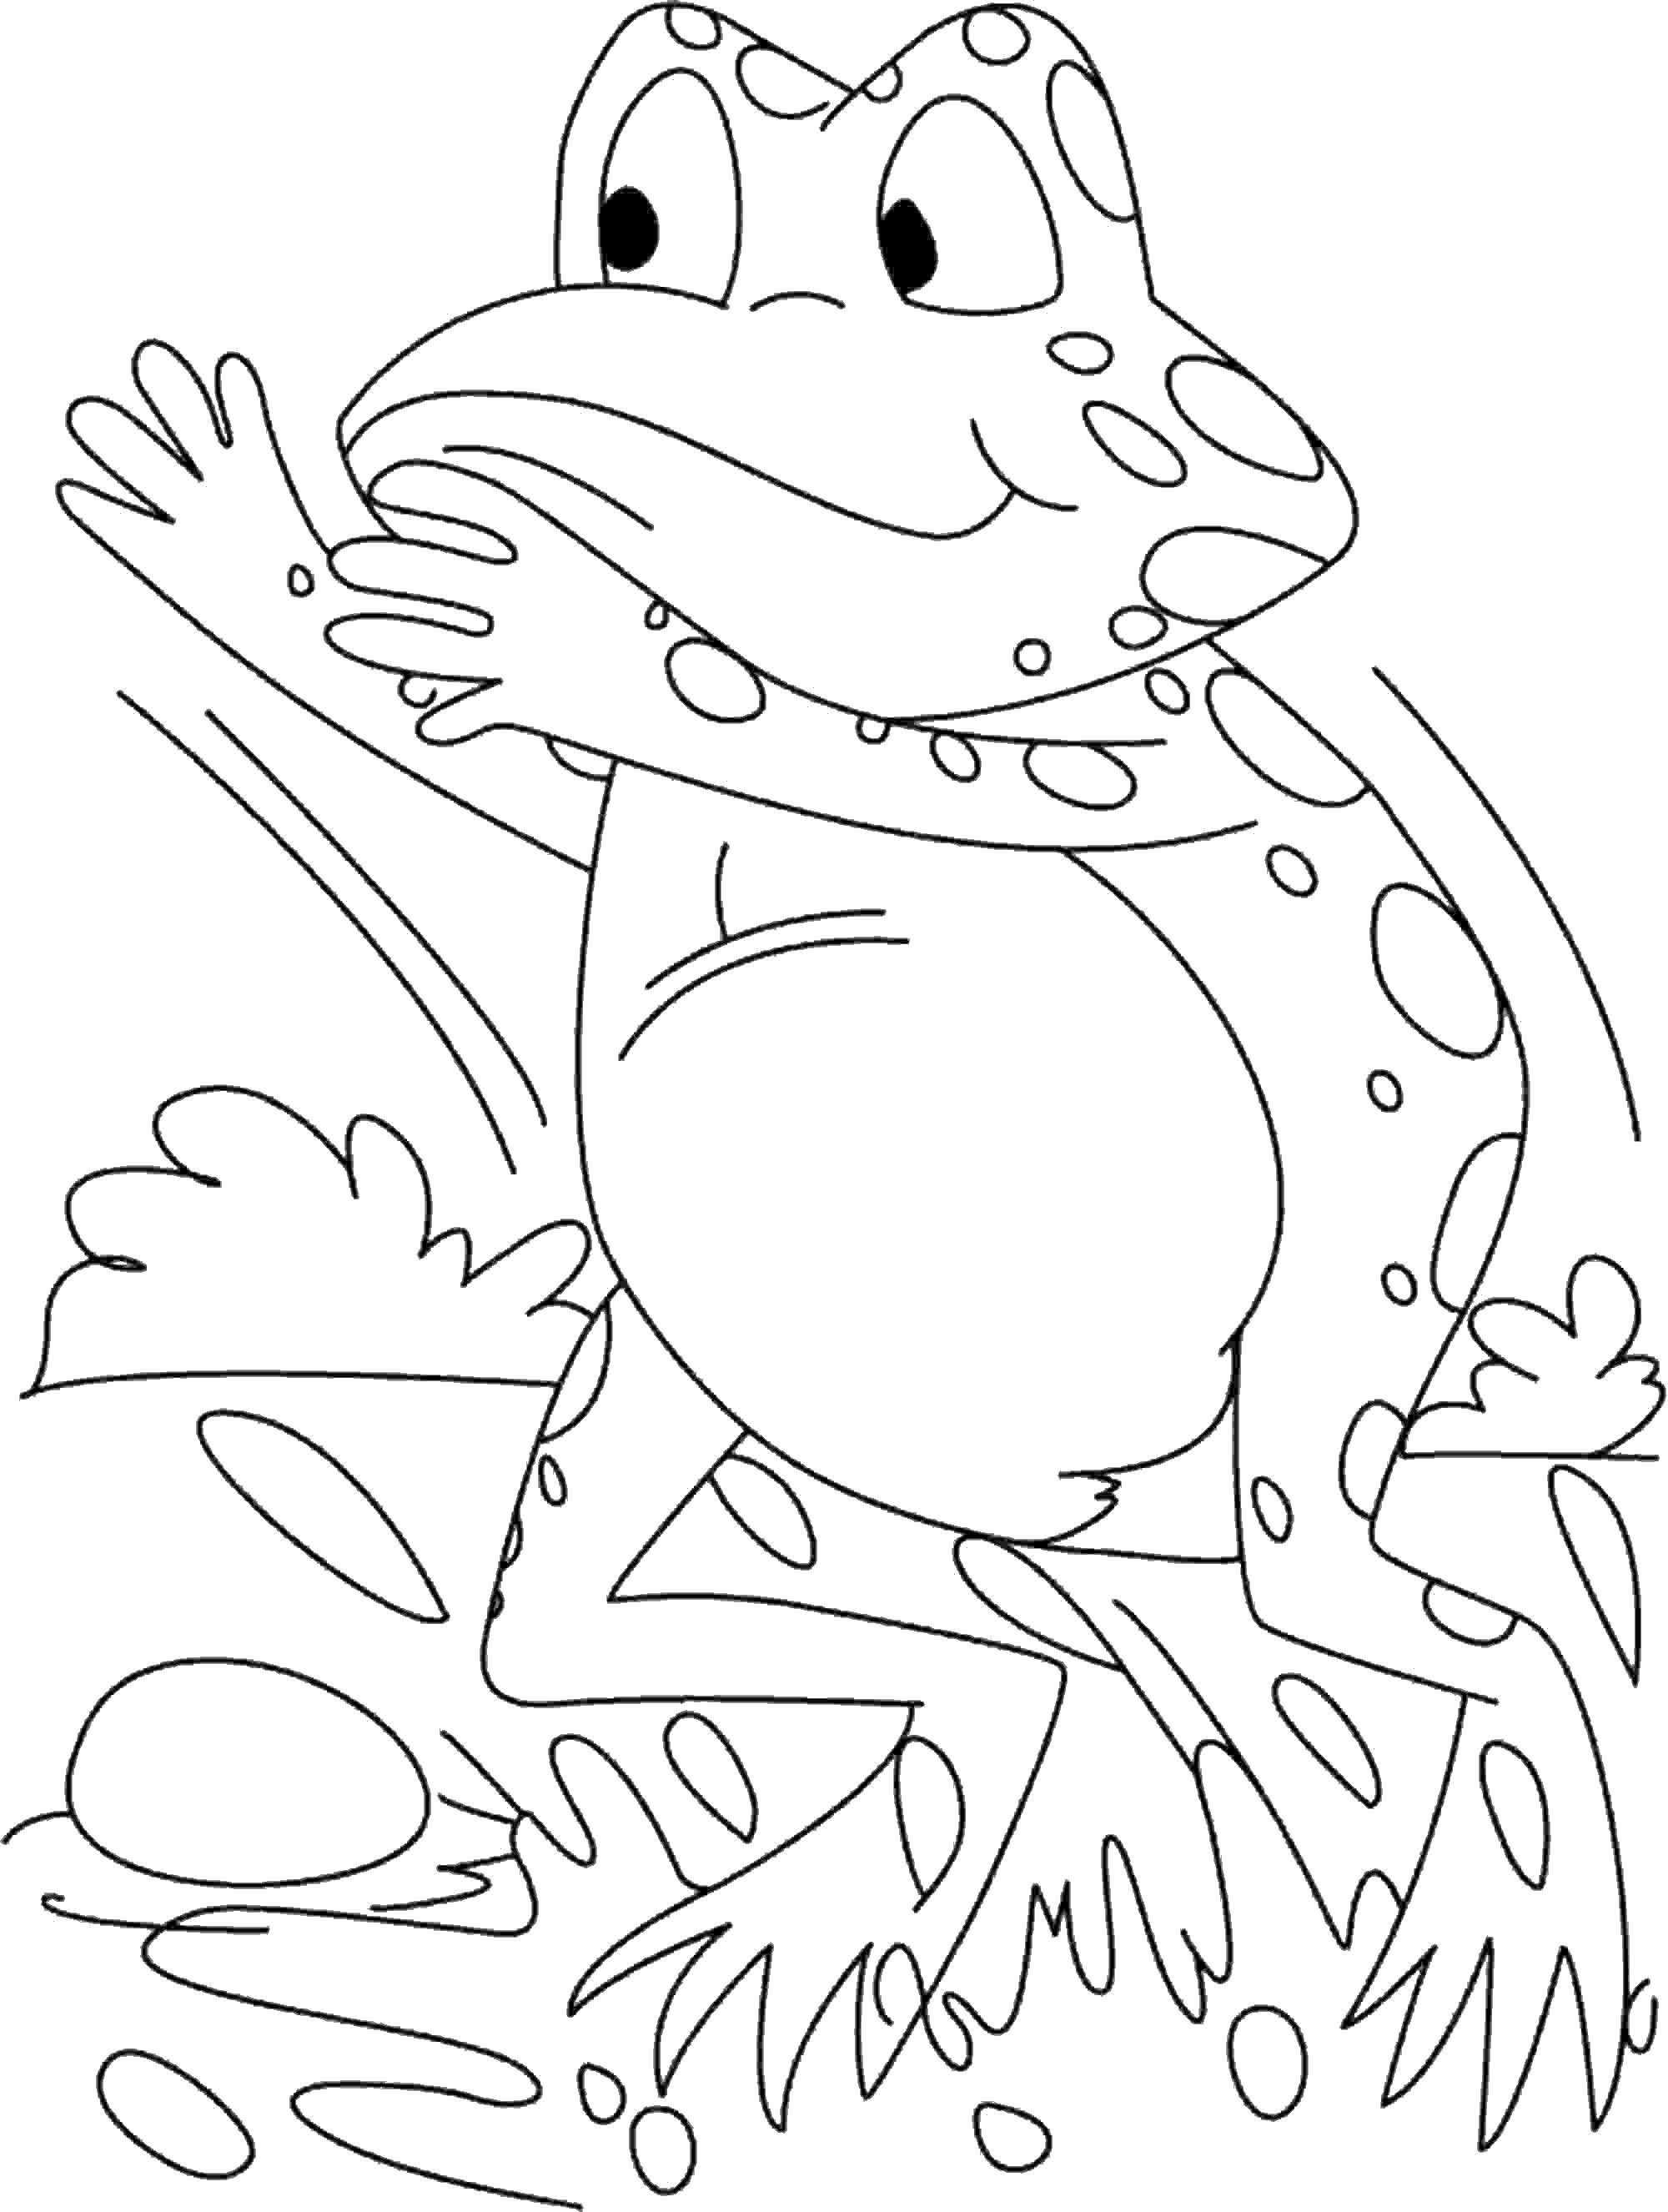 Coloring Frog. Category Animals. Tags:  animals, frog.